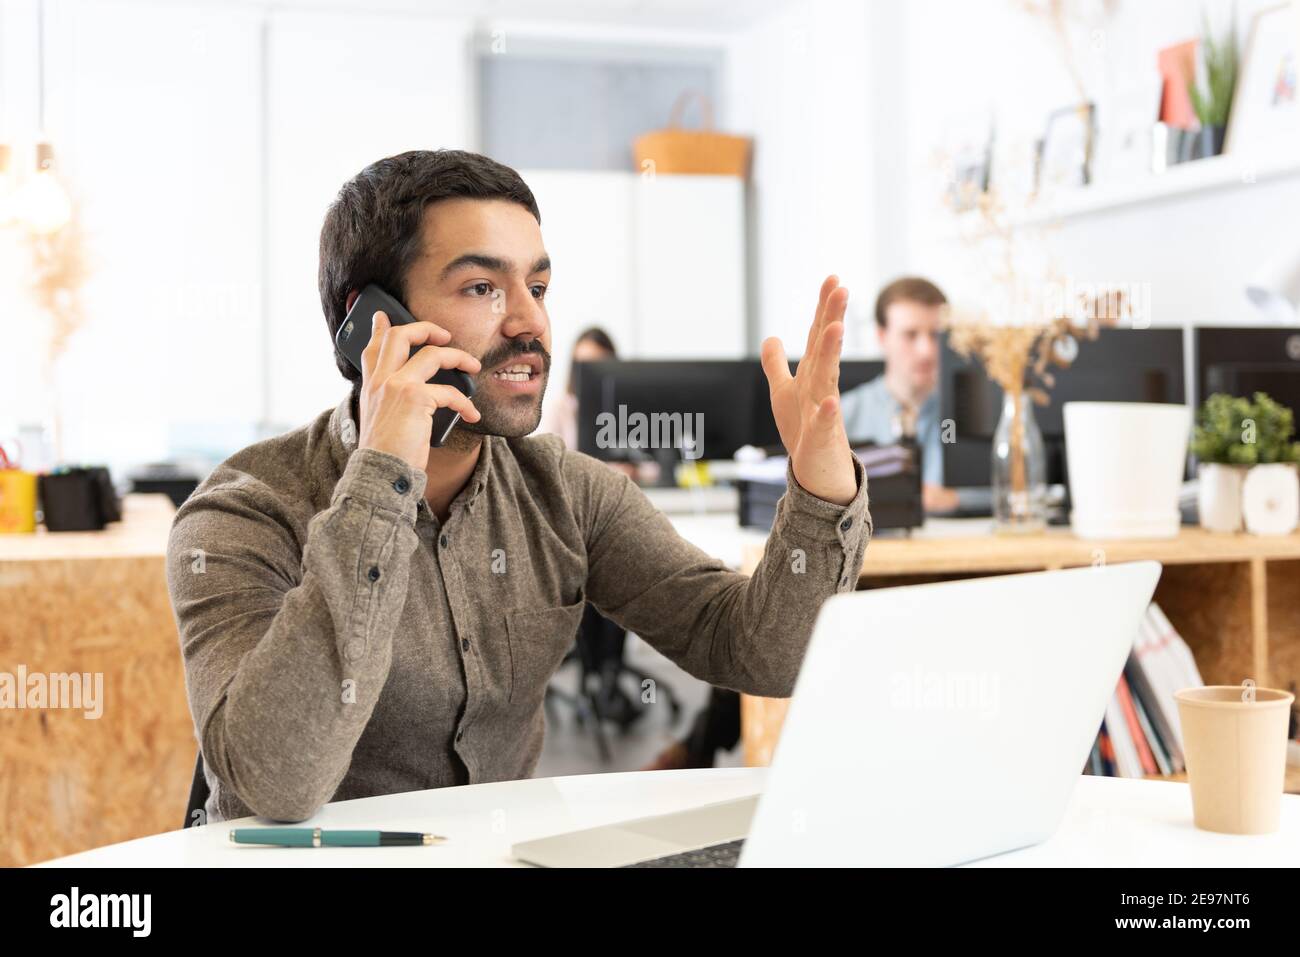 Angry hispanic man with mustache discussing on the phone in front of his laptop in the office. Stock Photo